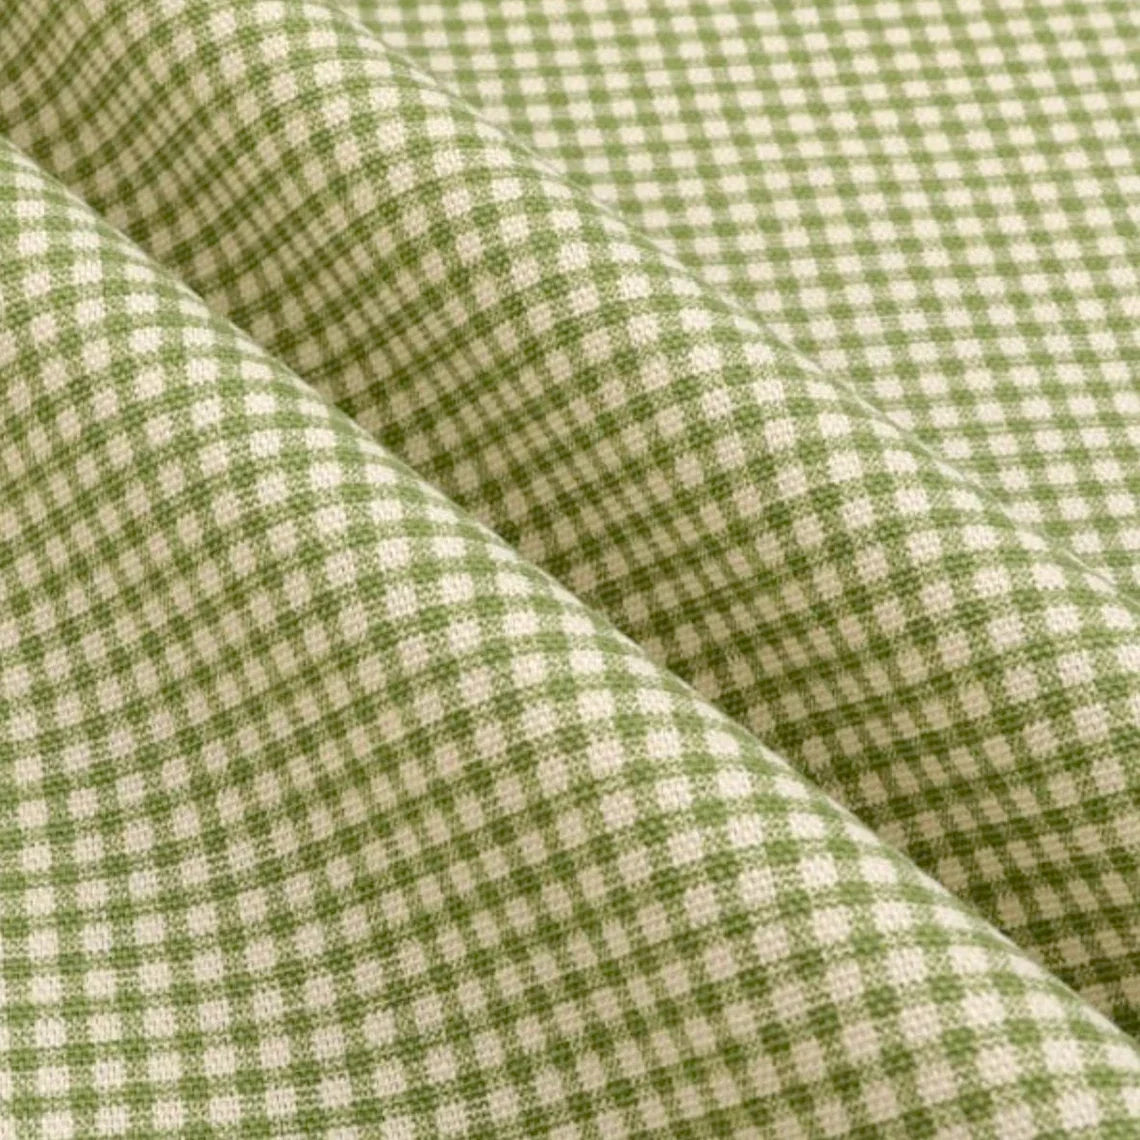 scalloped valance in farmhouse jungle green gingham check